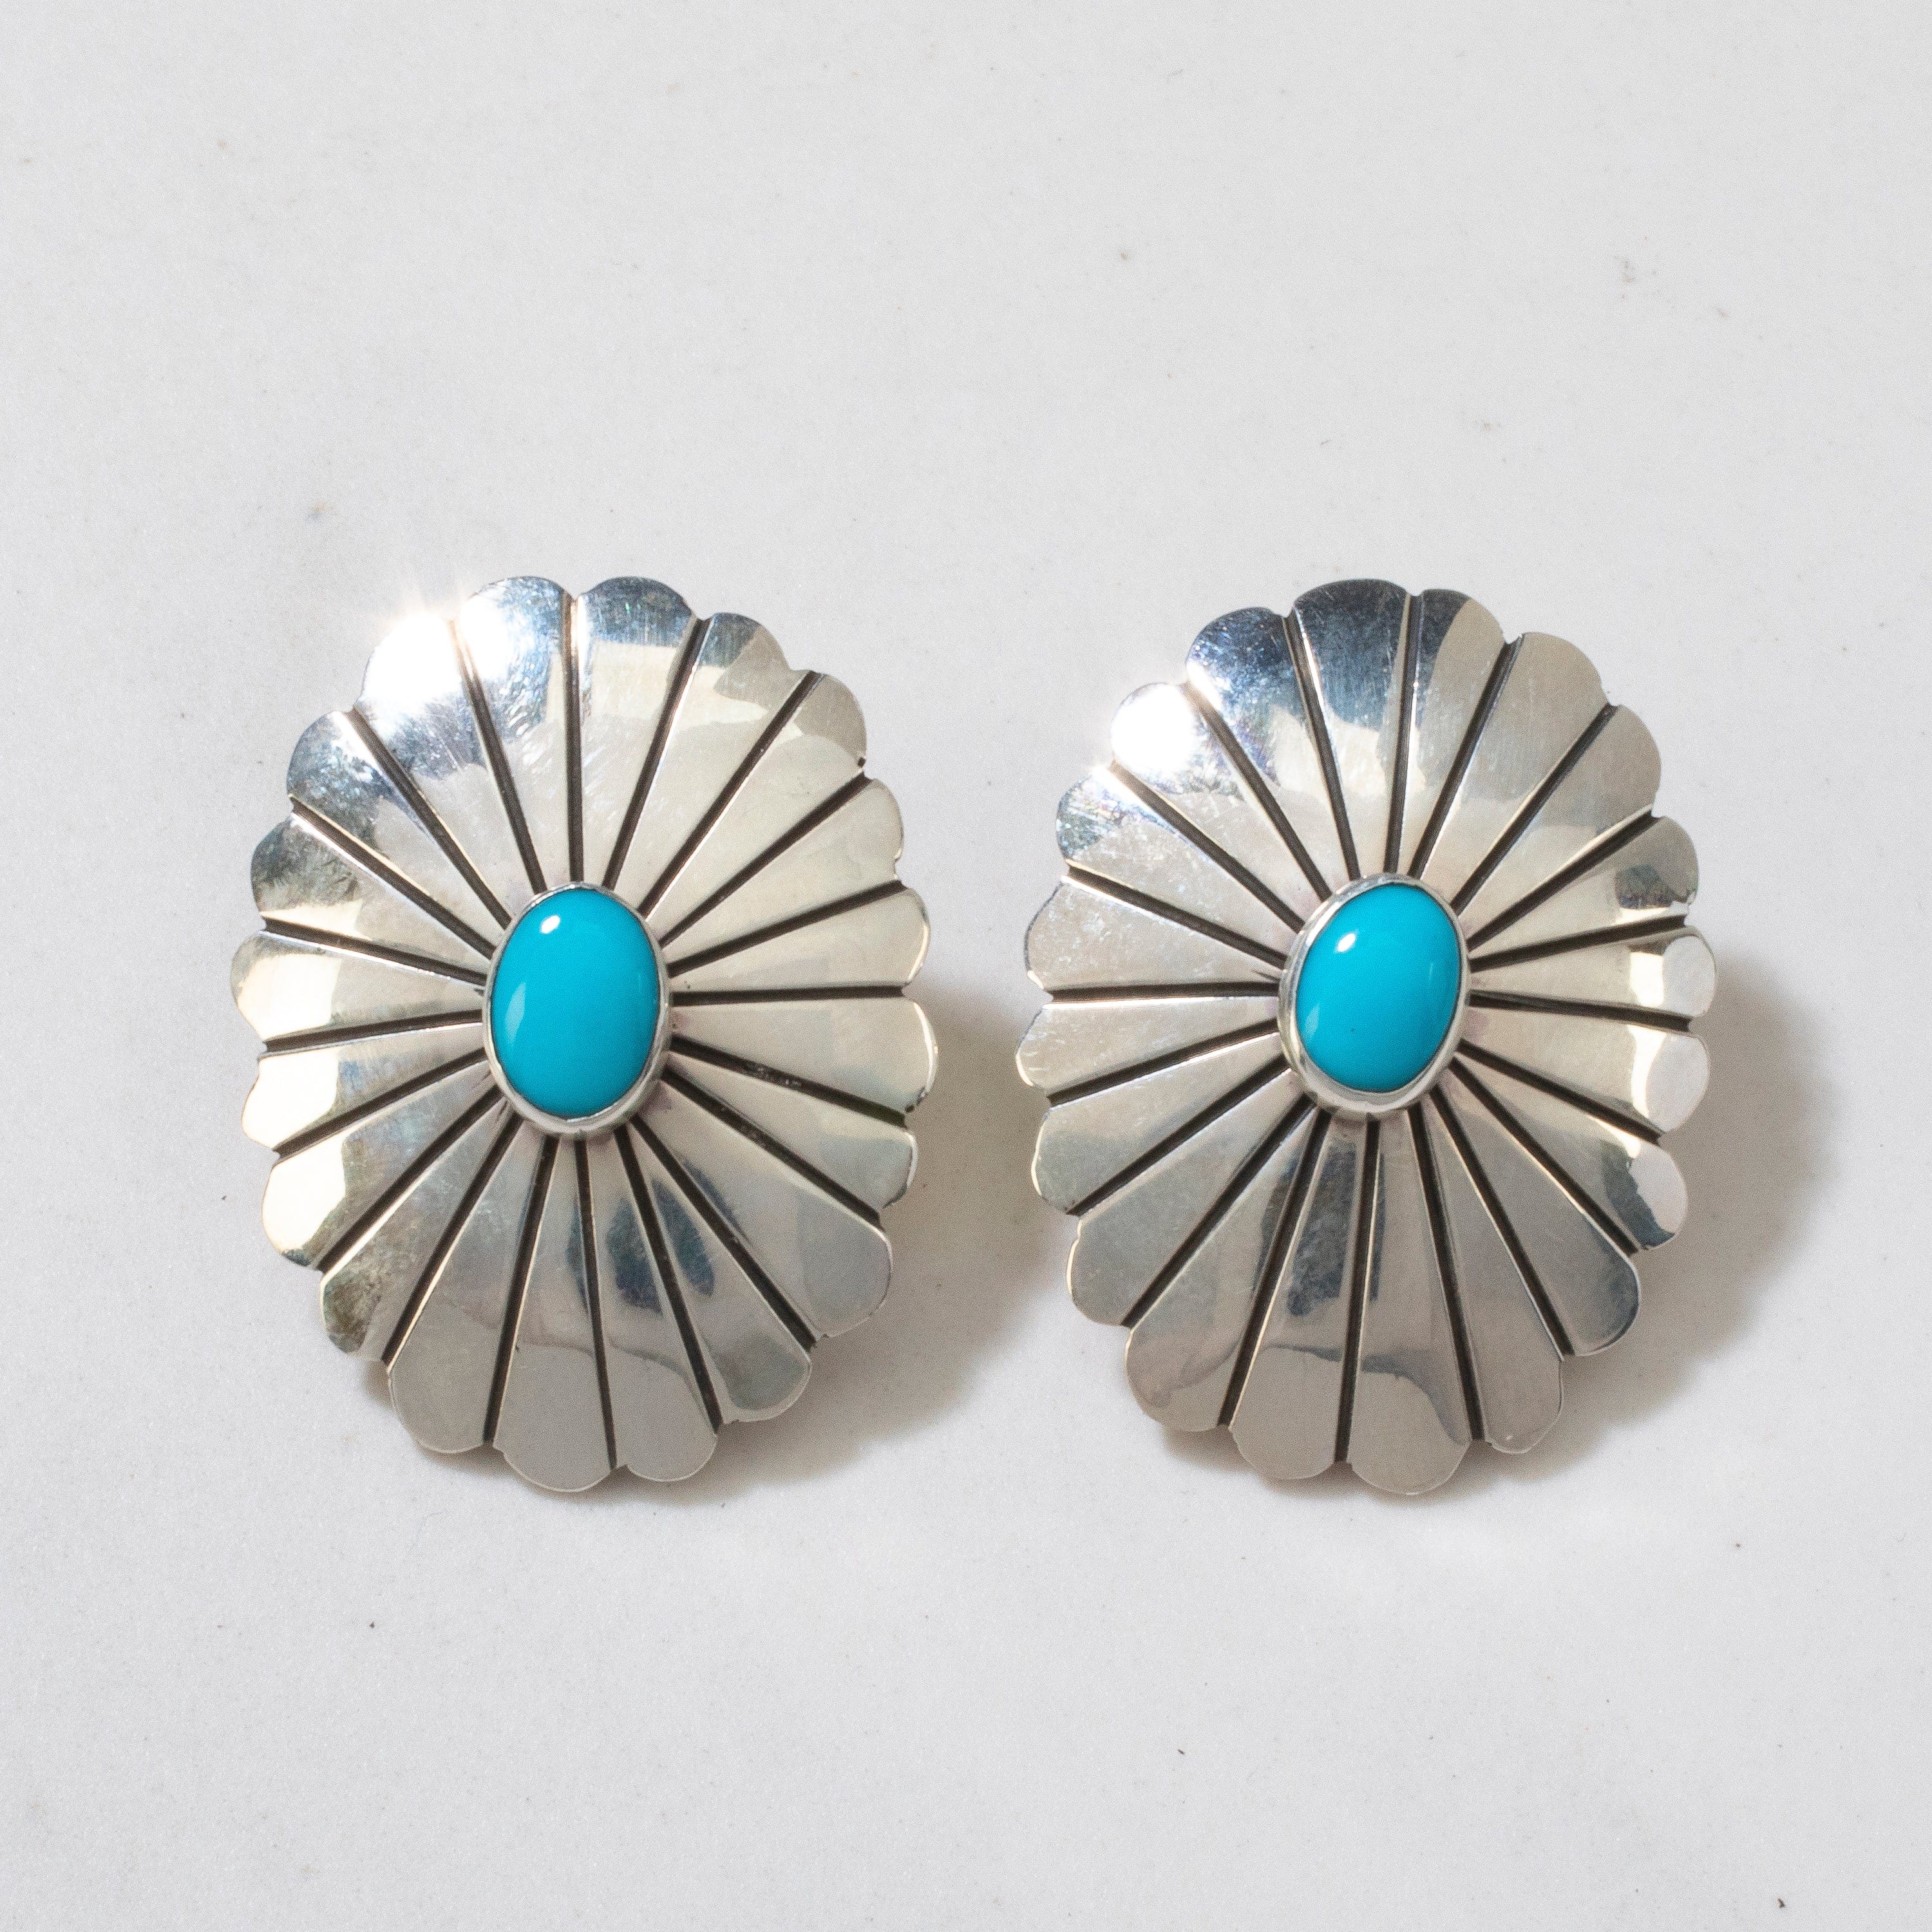 Kalifano Native American Jewelry Sleeping Beauty Turquoise Flower Navajo USA Native American Made 925 Sterling Silver Earrings with Clip On Backing NAE500.012